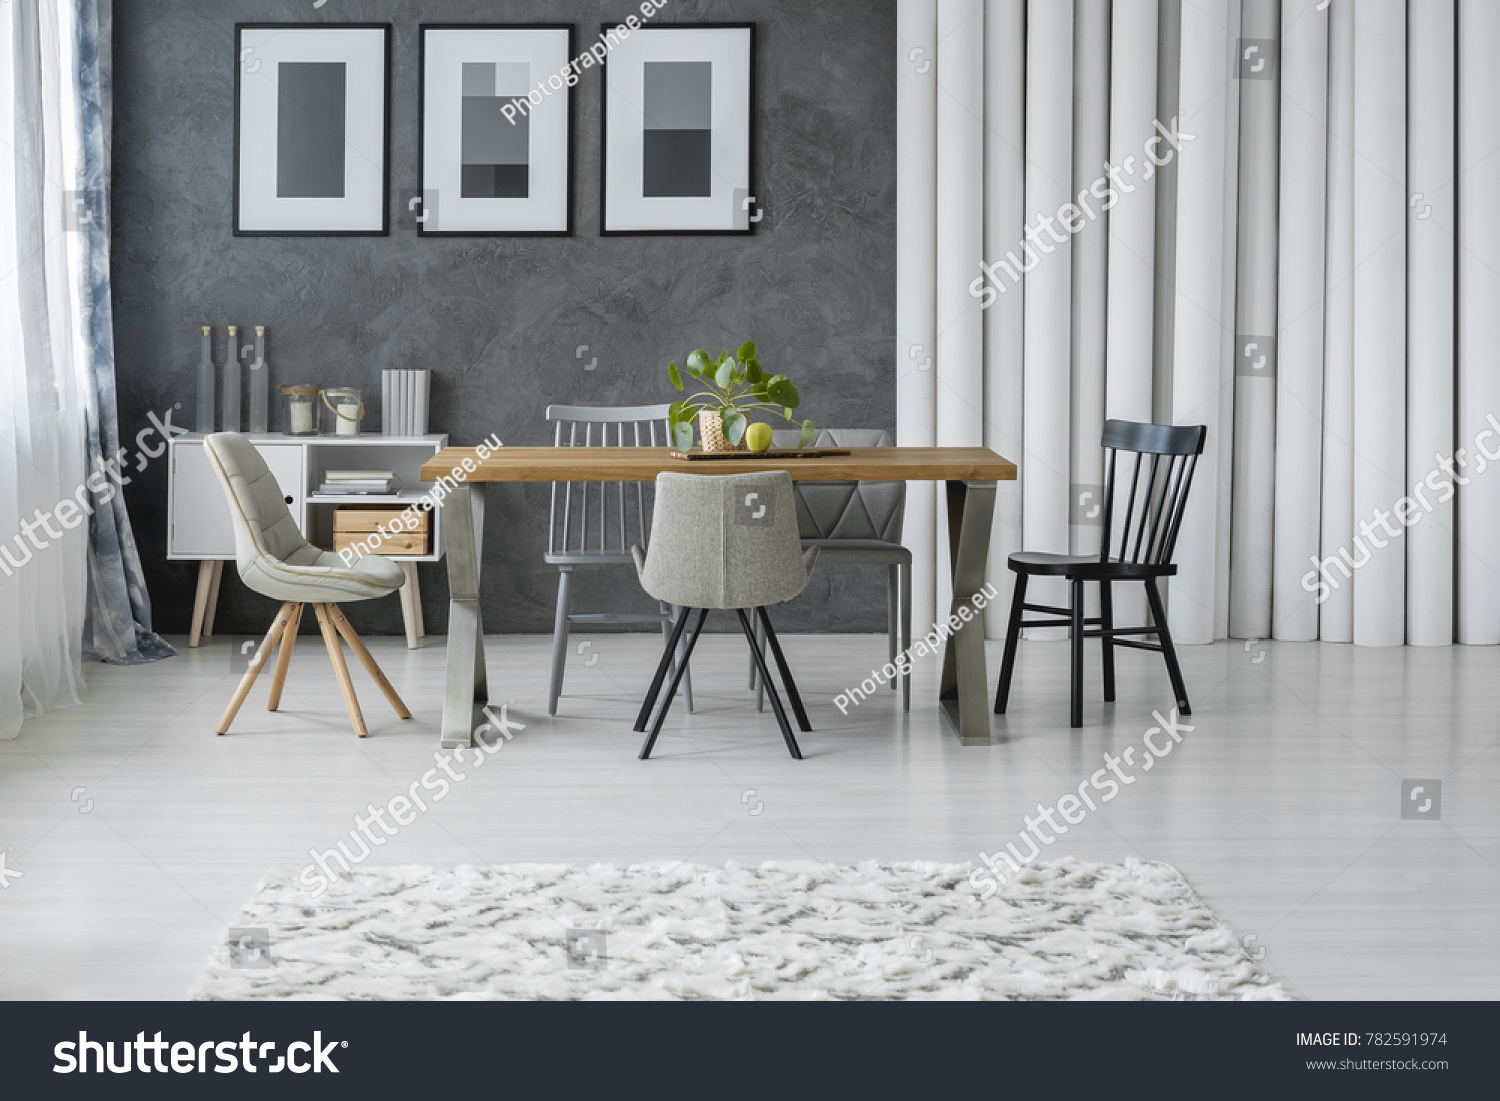 Patterned Carpet Grey Dining Room Wooden Stock Photo 782591974